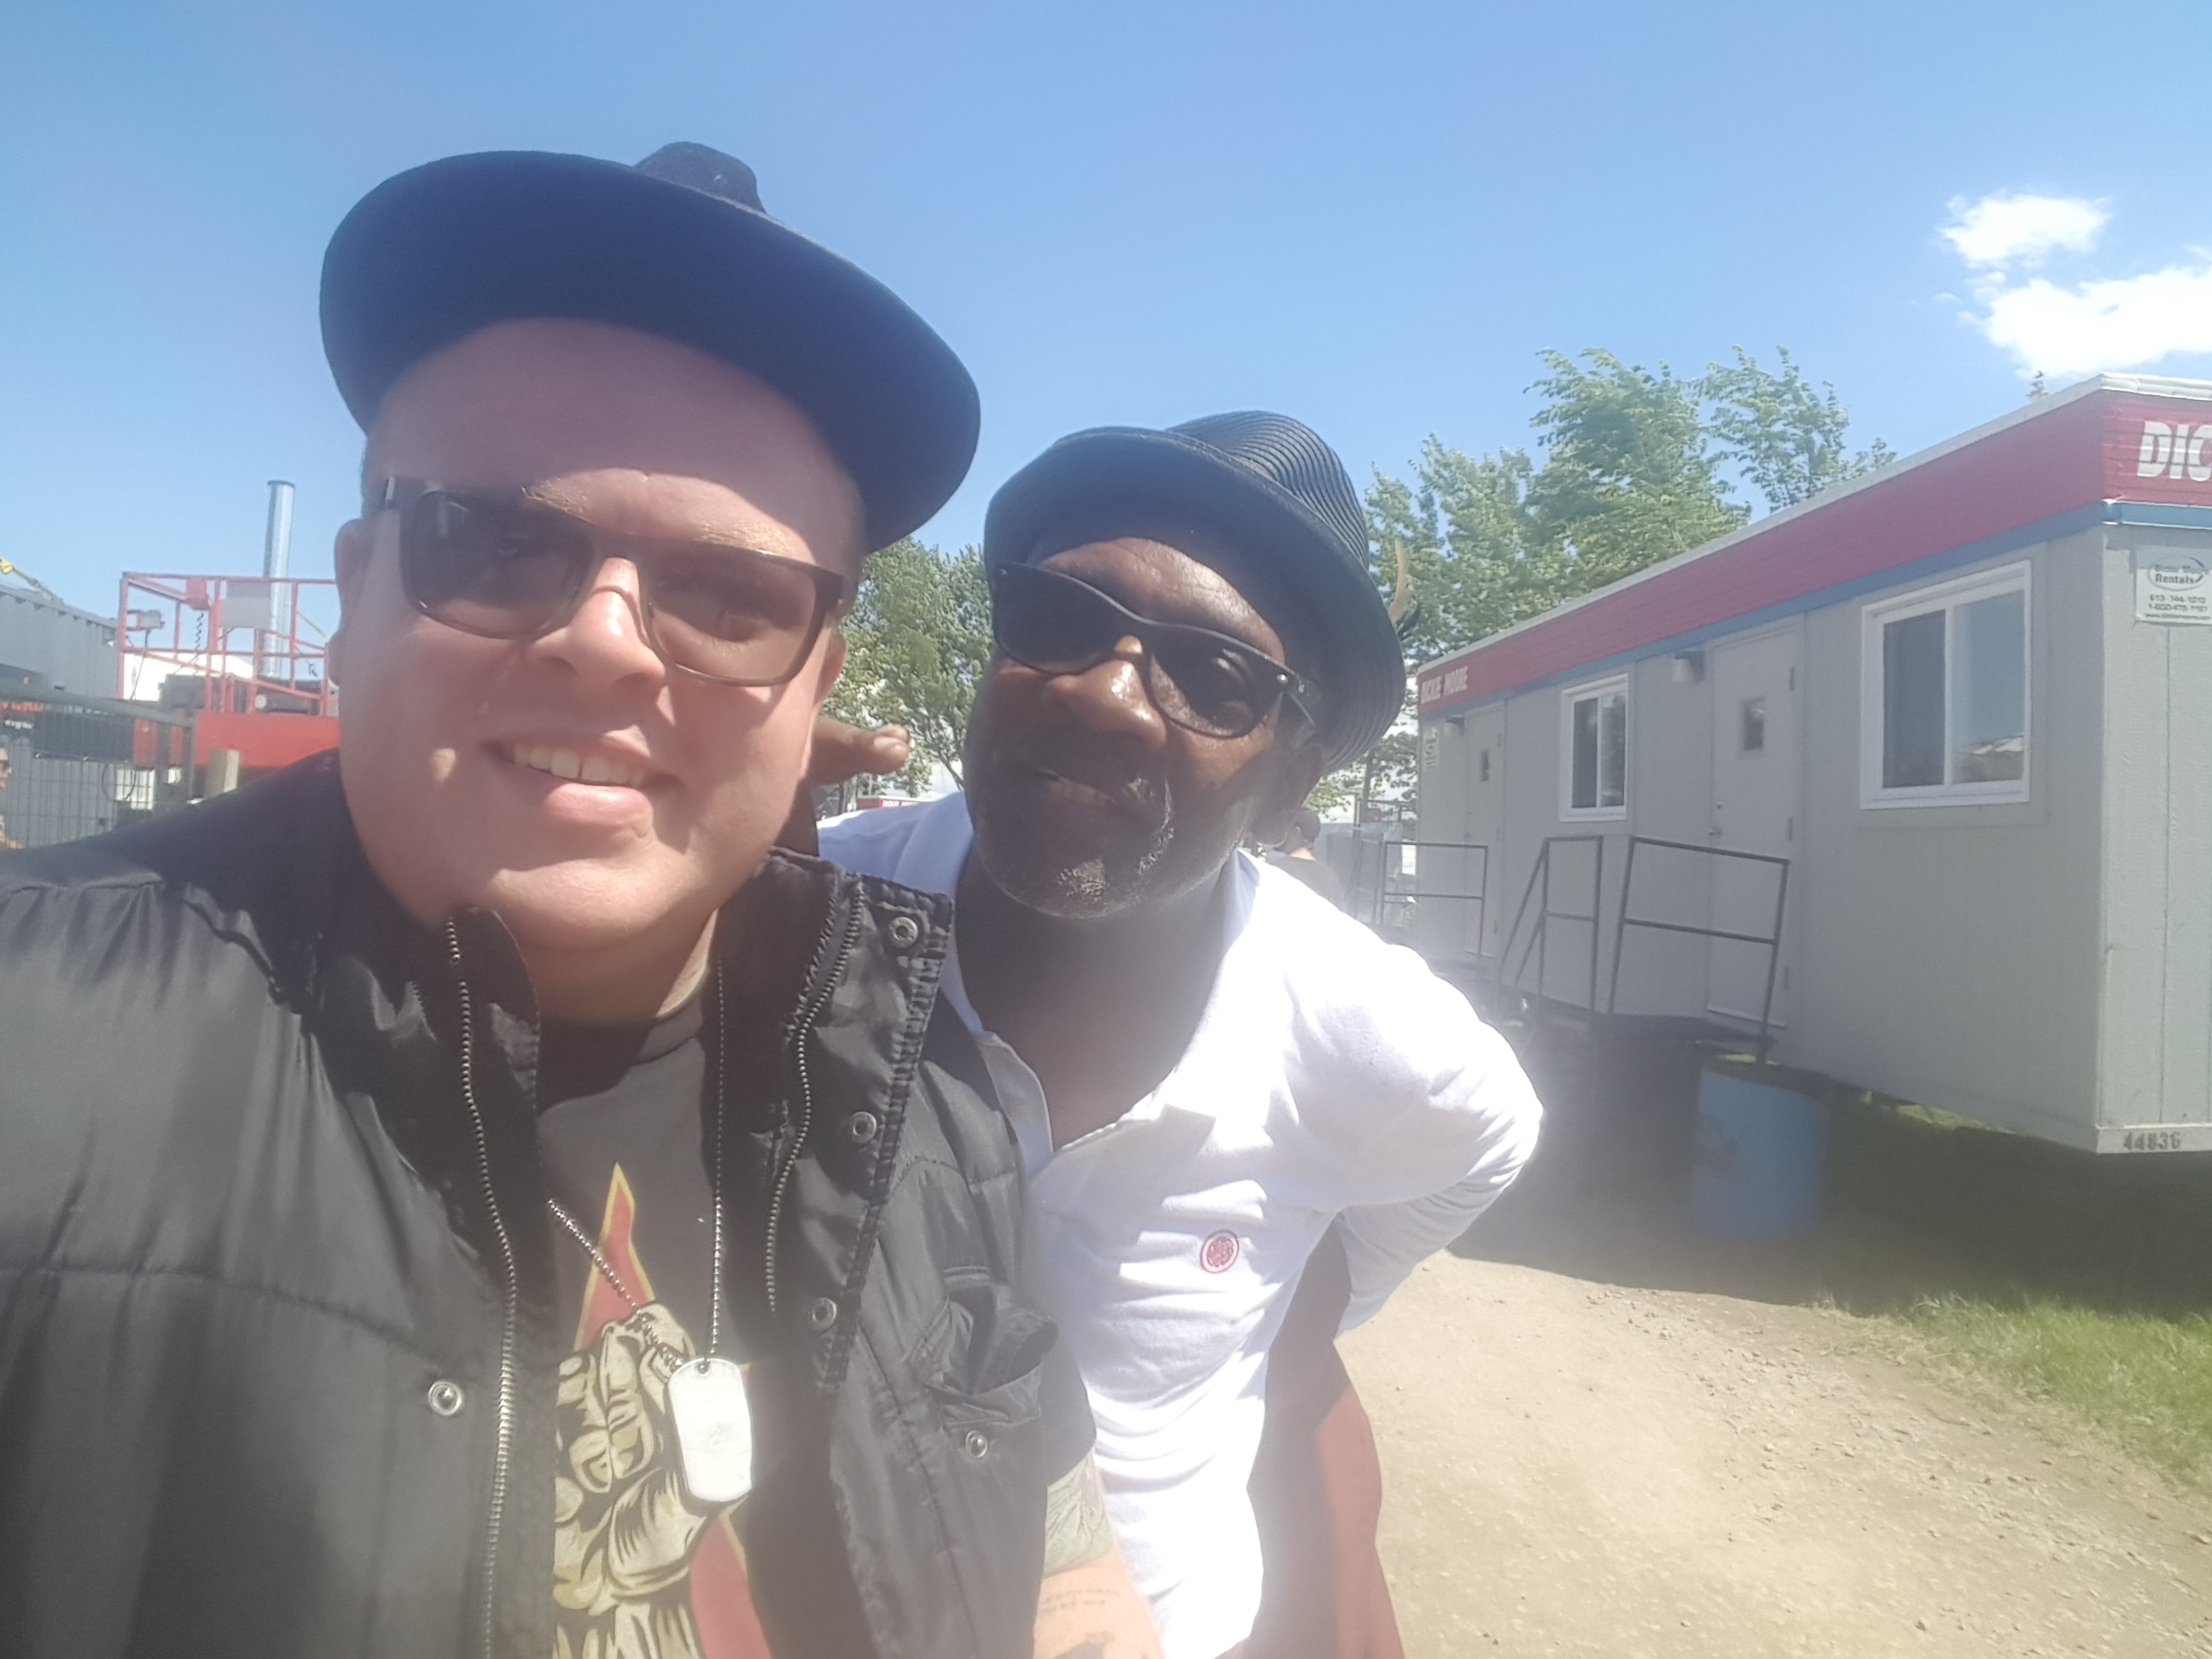 Our own Leigh Bursey posing with Lynval Golding of Lynval Golding and Contra Coup, and legendary English band, The Specials.